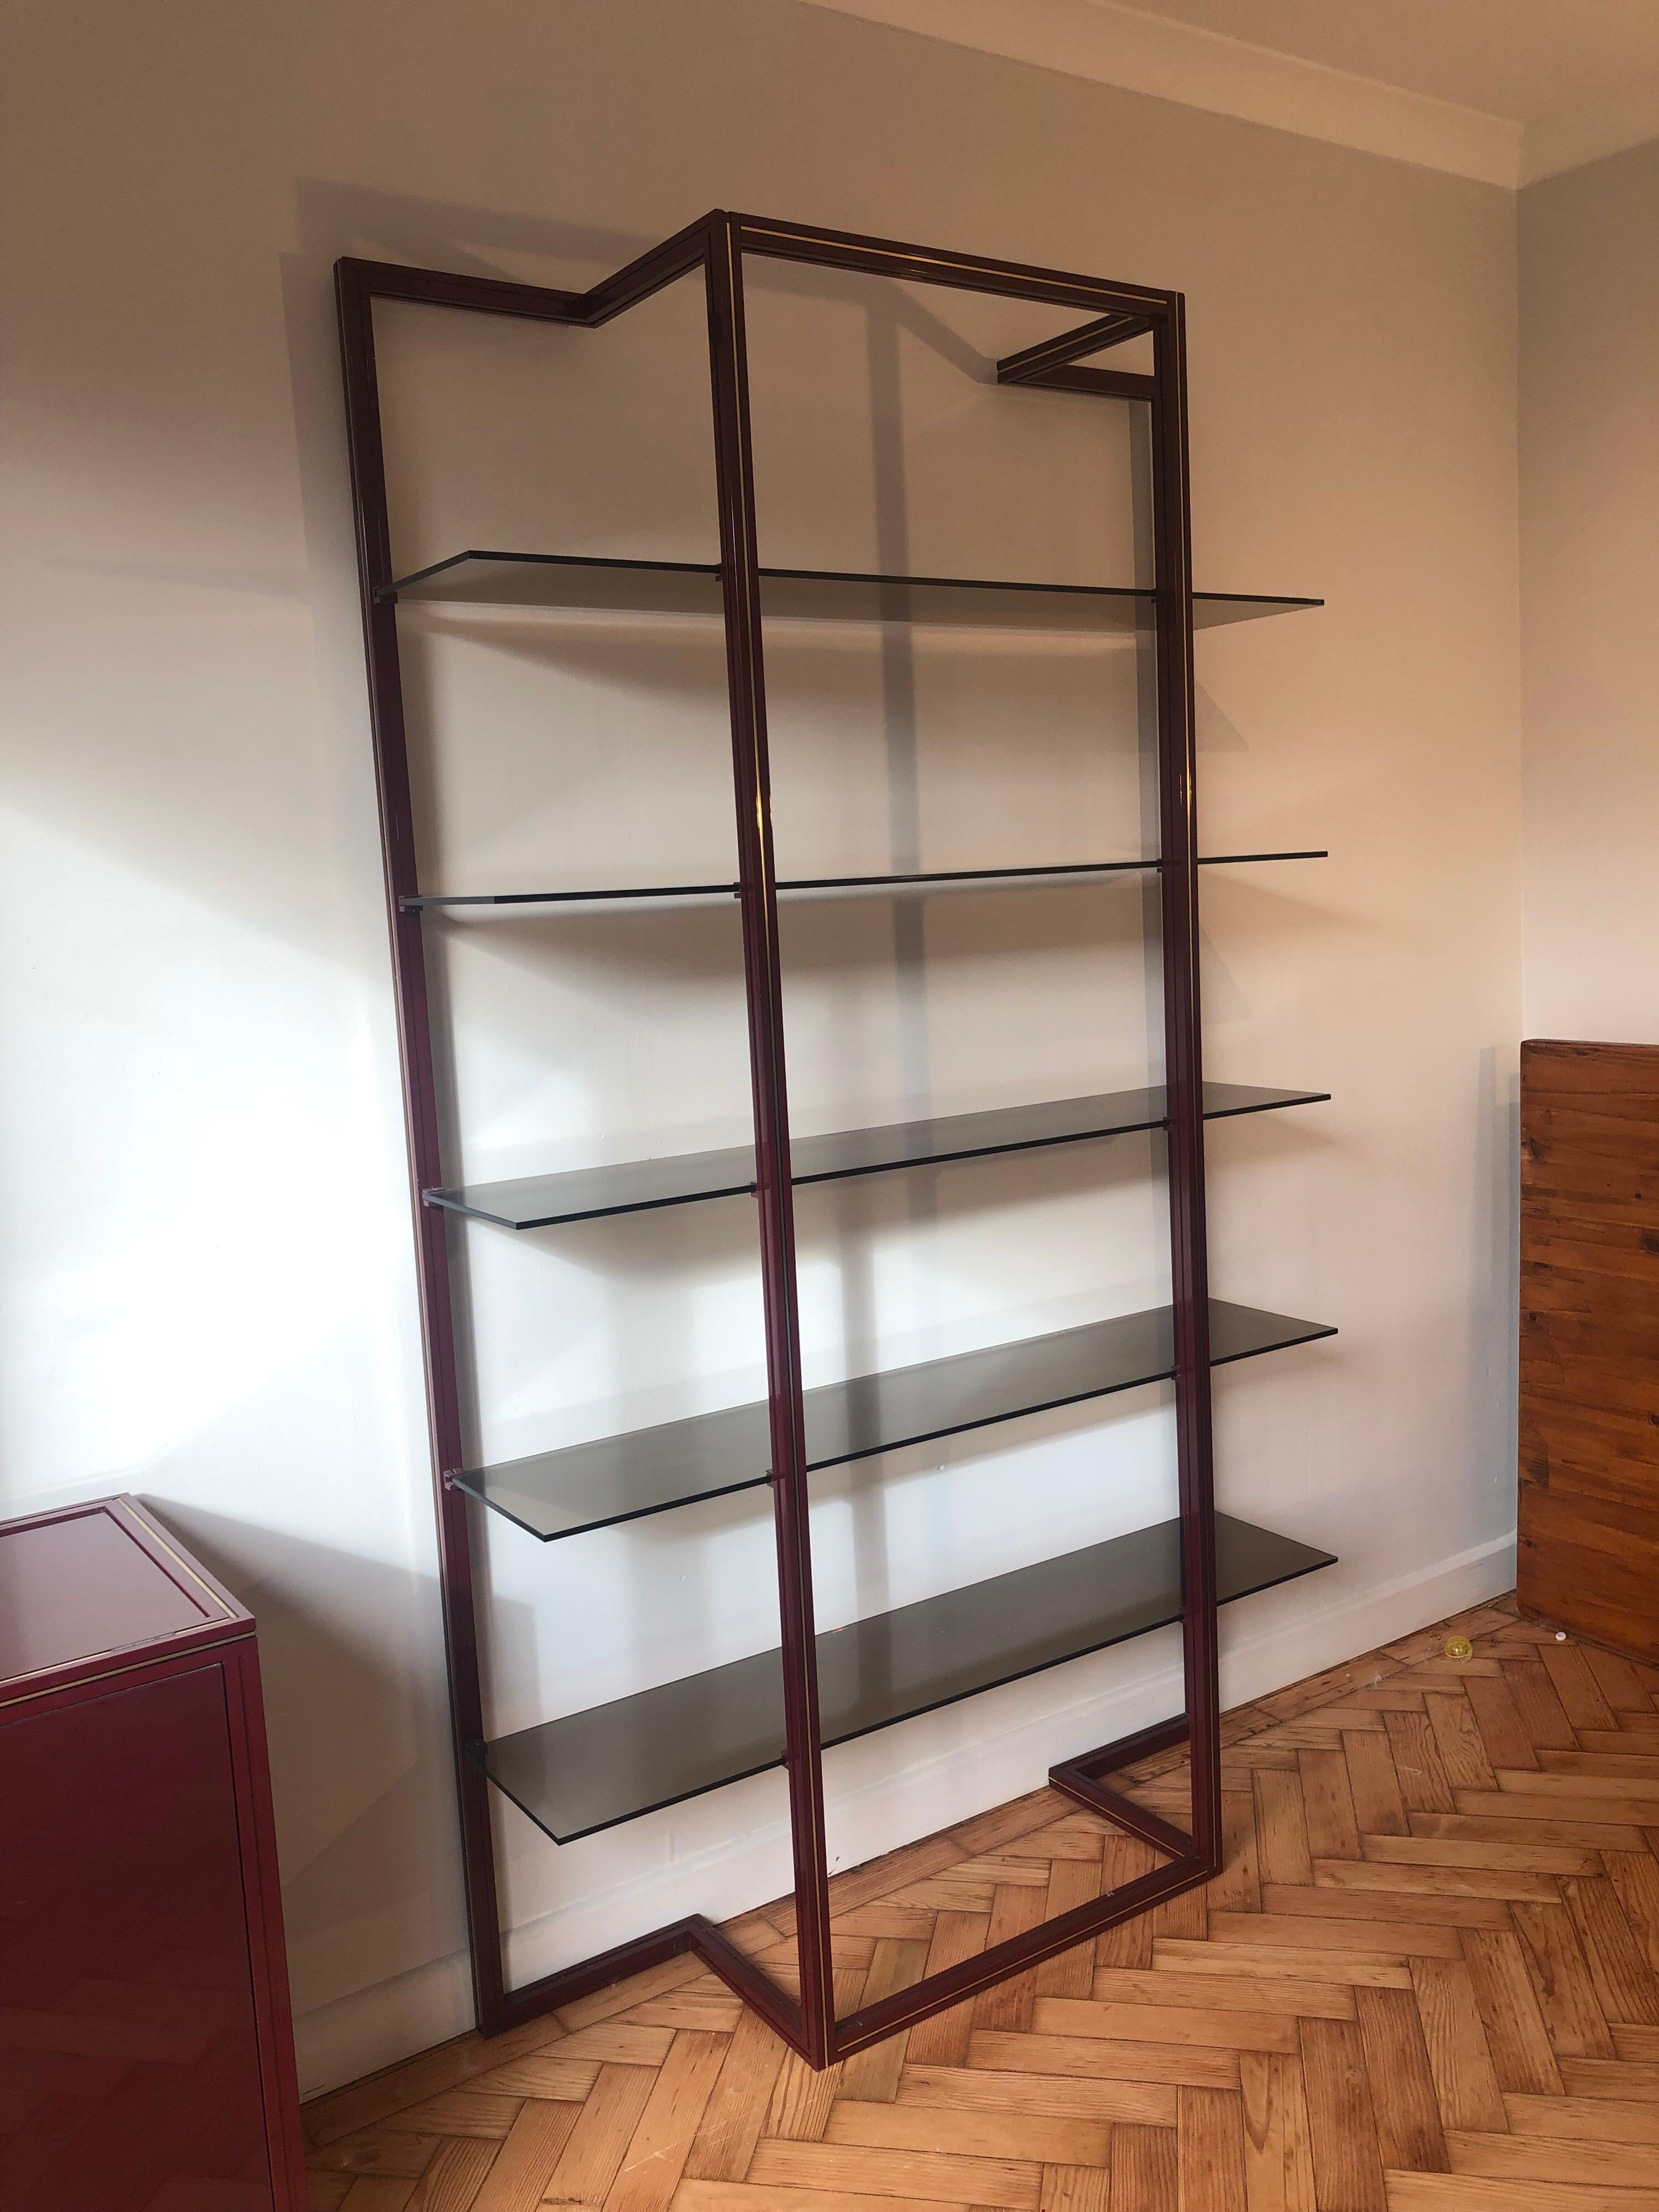 Pierre Vandel tall étagère with smoked glass shelves and aluminum frame. Overall good original condition with the occasional wear. Couple glass chips on the shelves and some scratches.
  